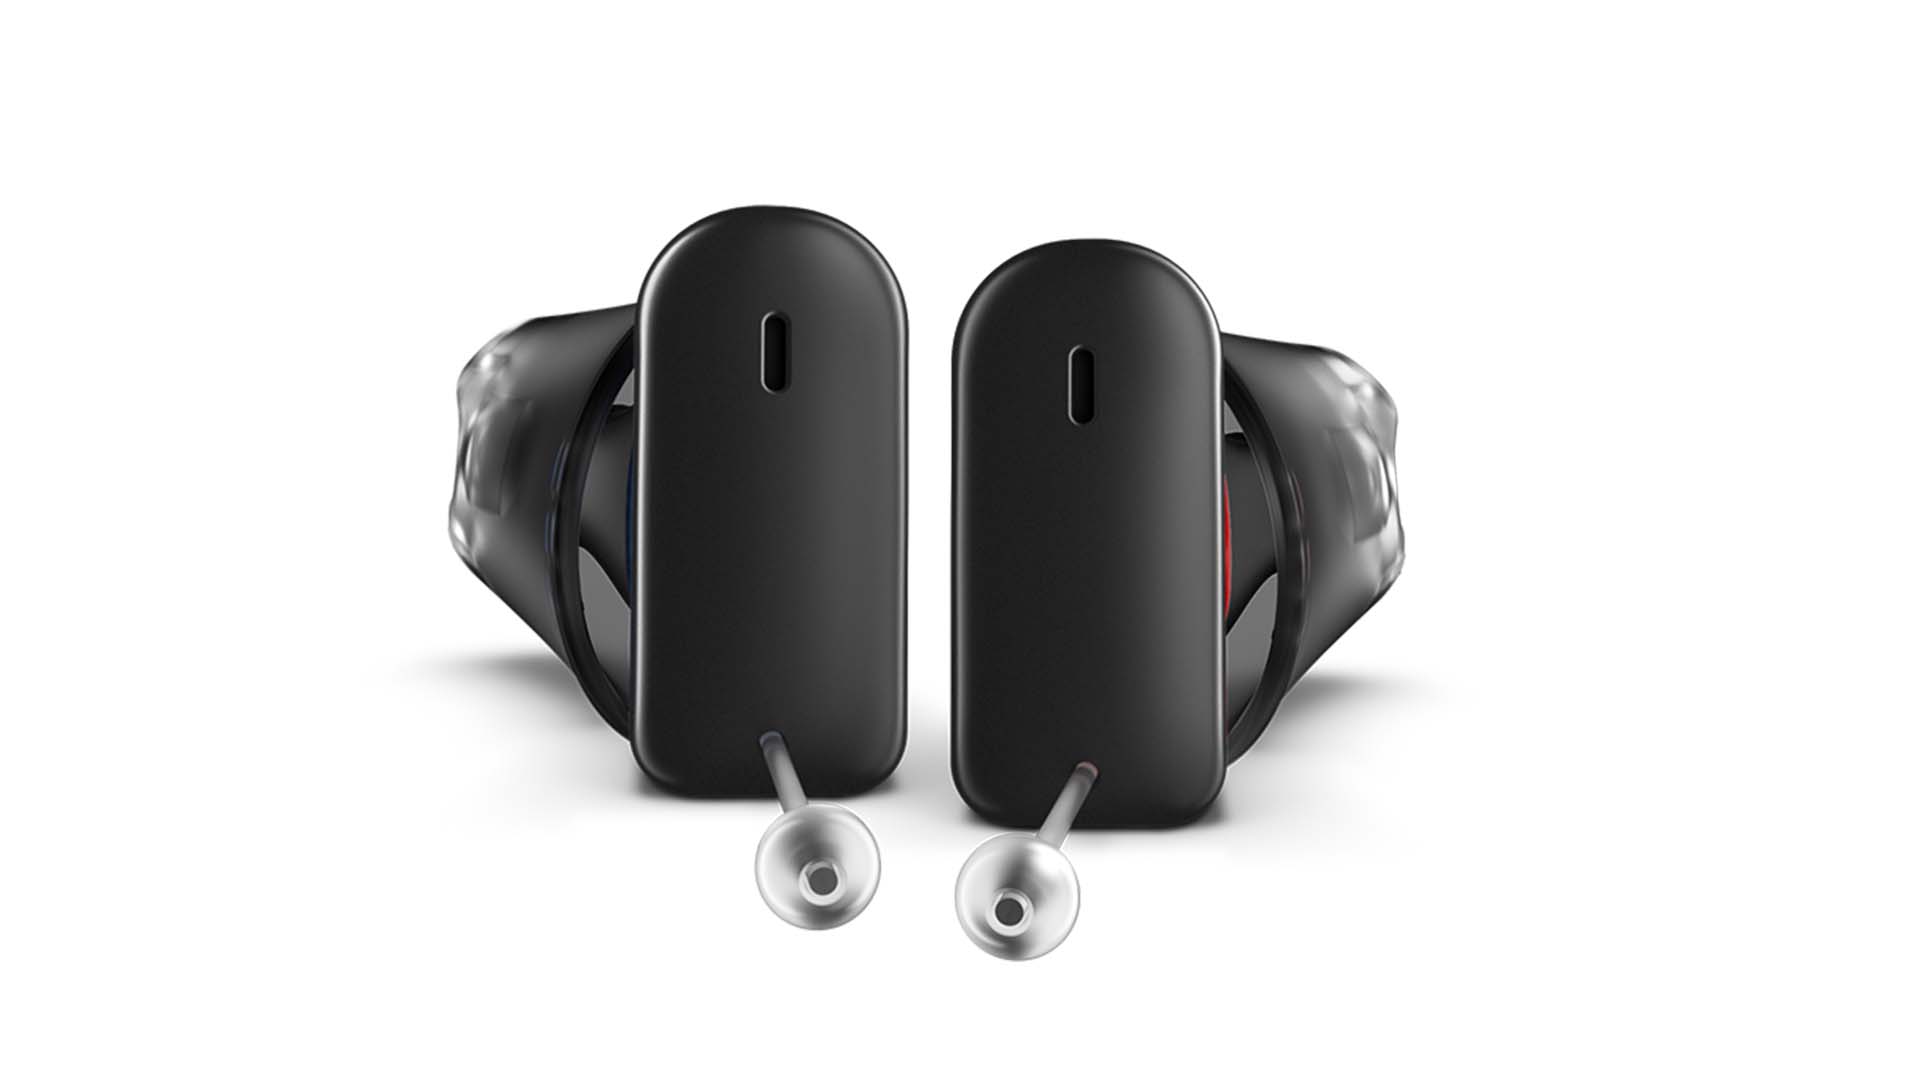 A pair of Silk Charge&Go instant-fit hearing aids in color black